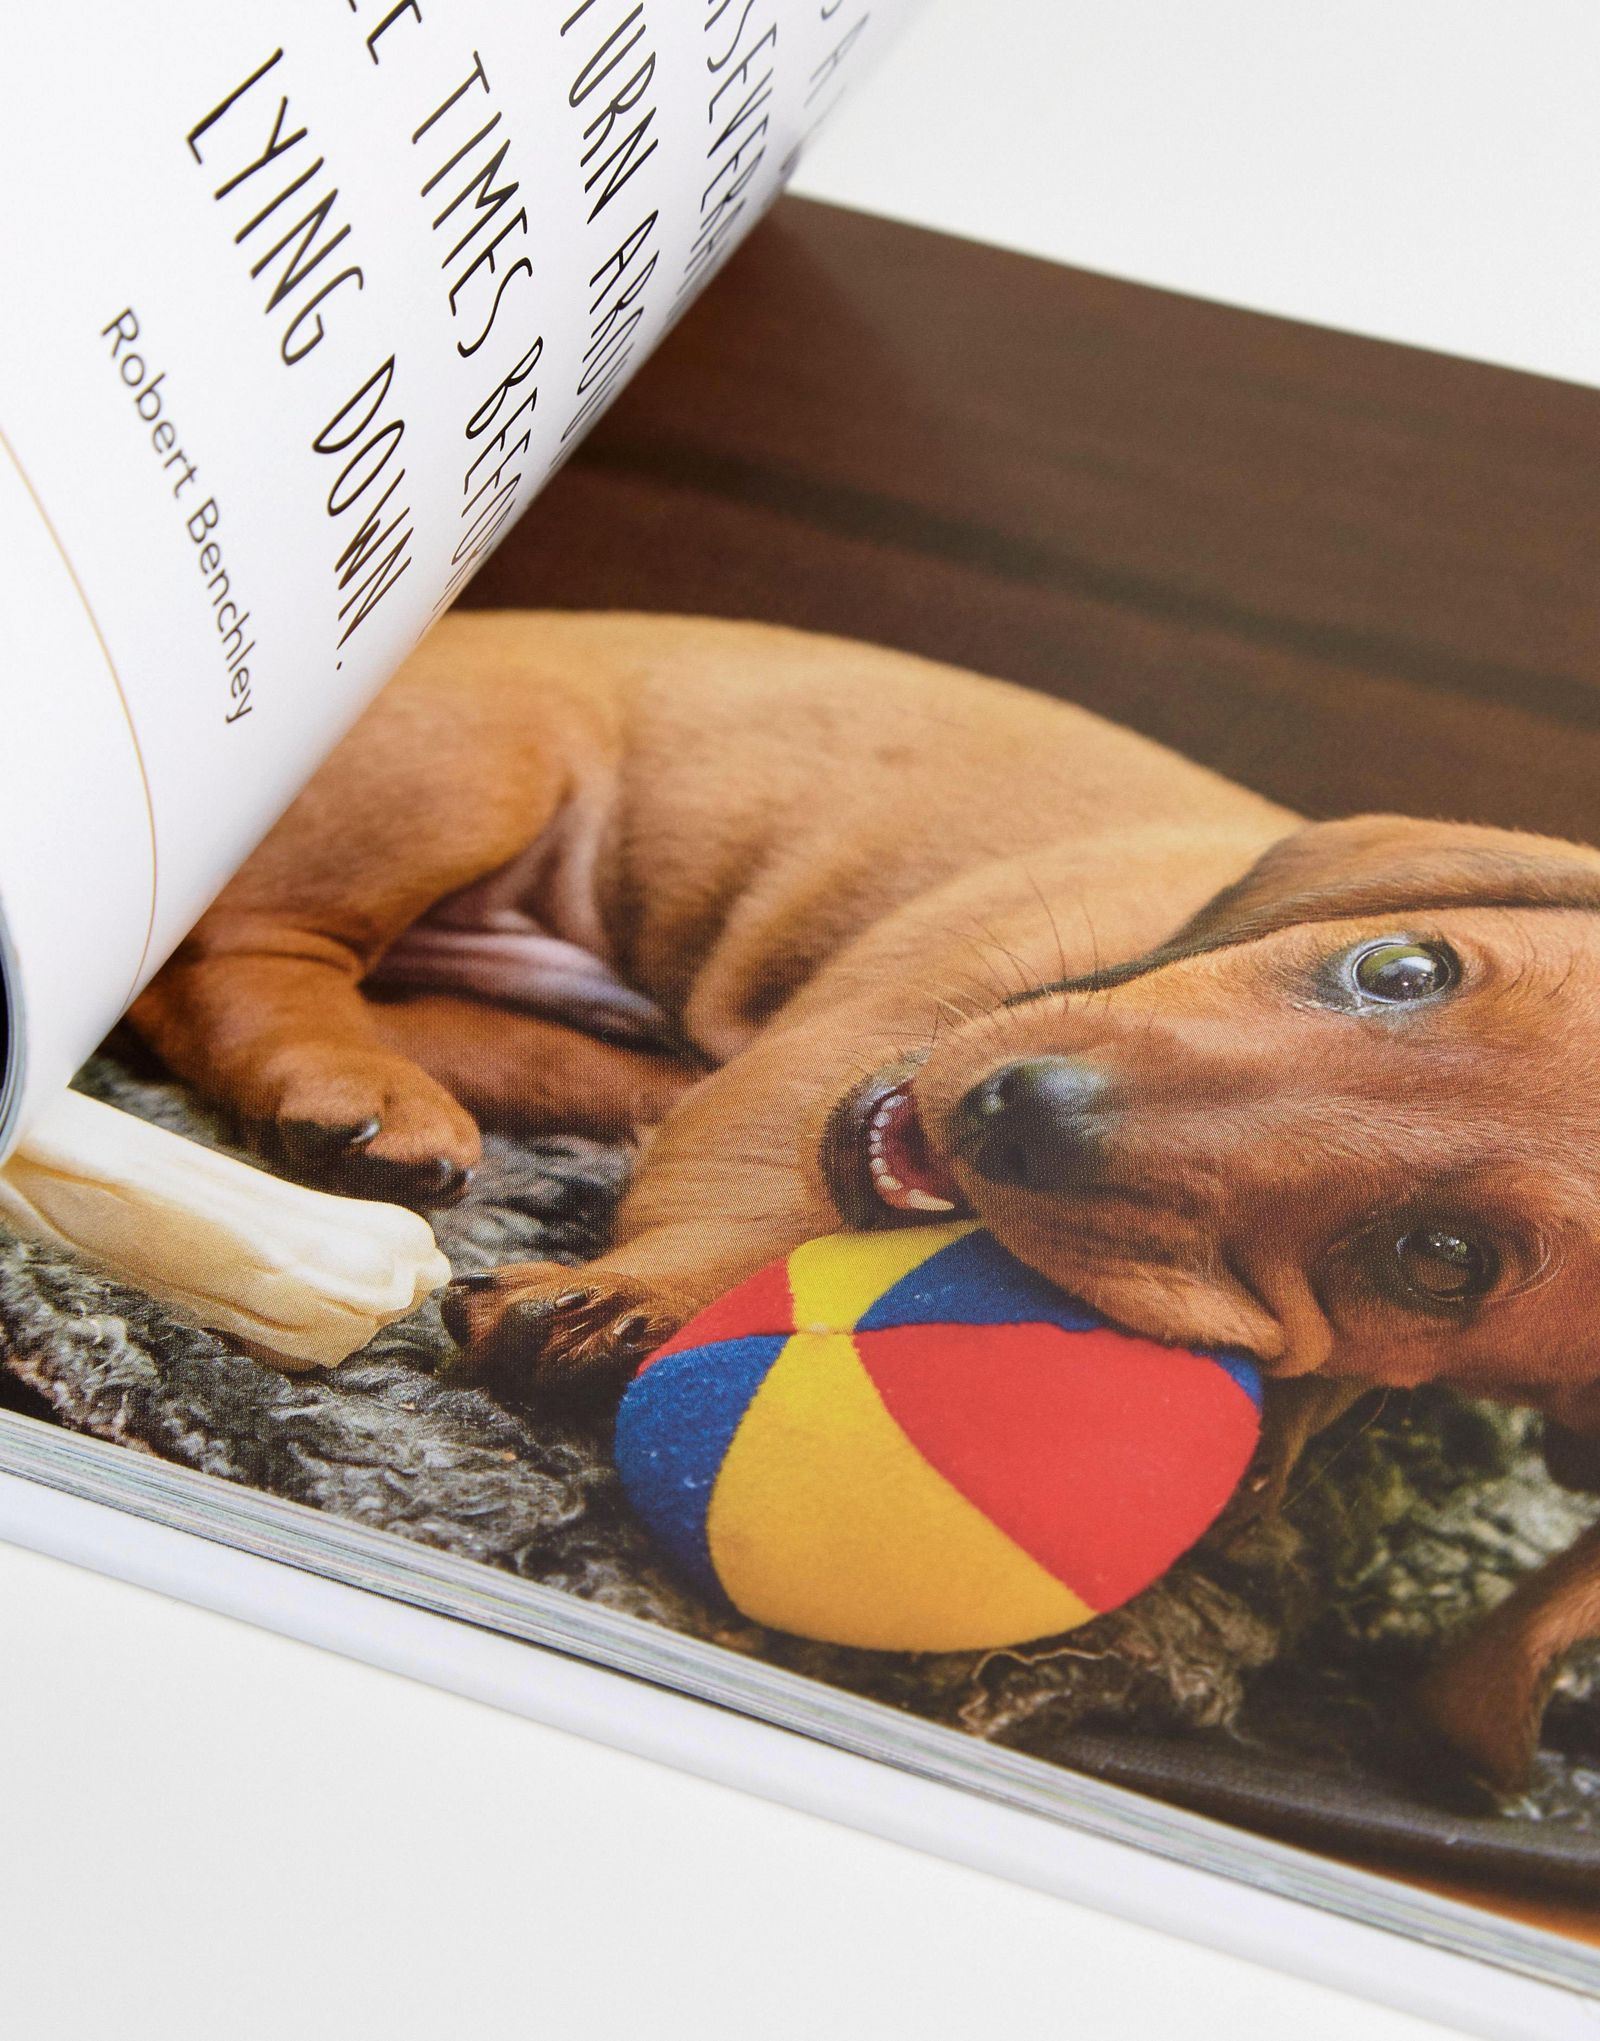 Love is a Sausage Dog Book